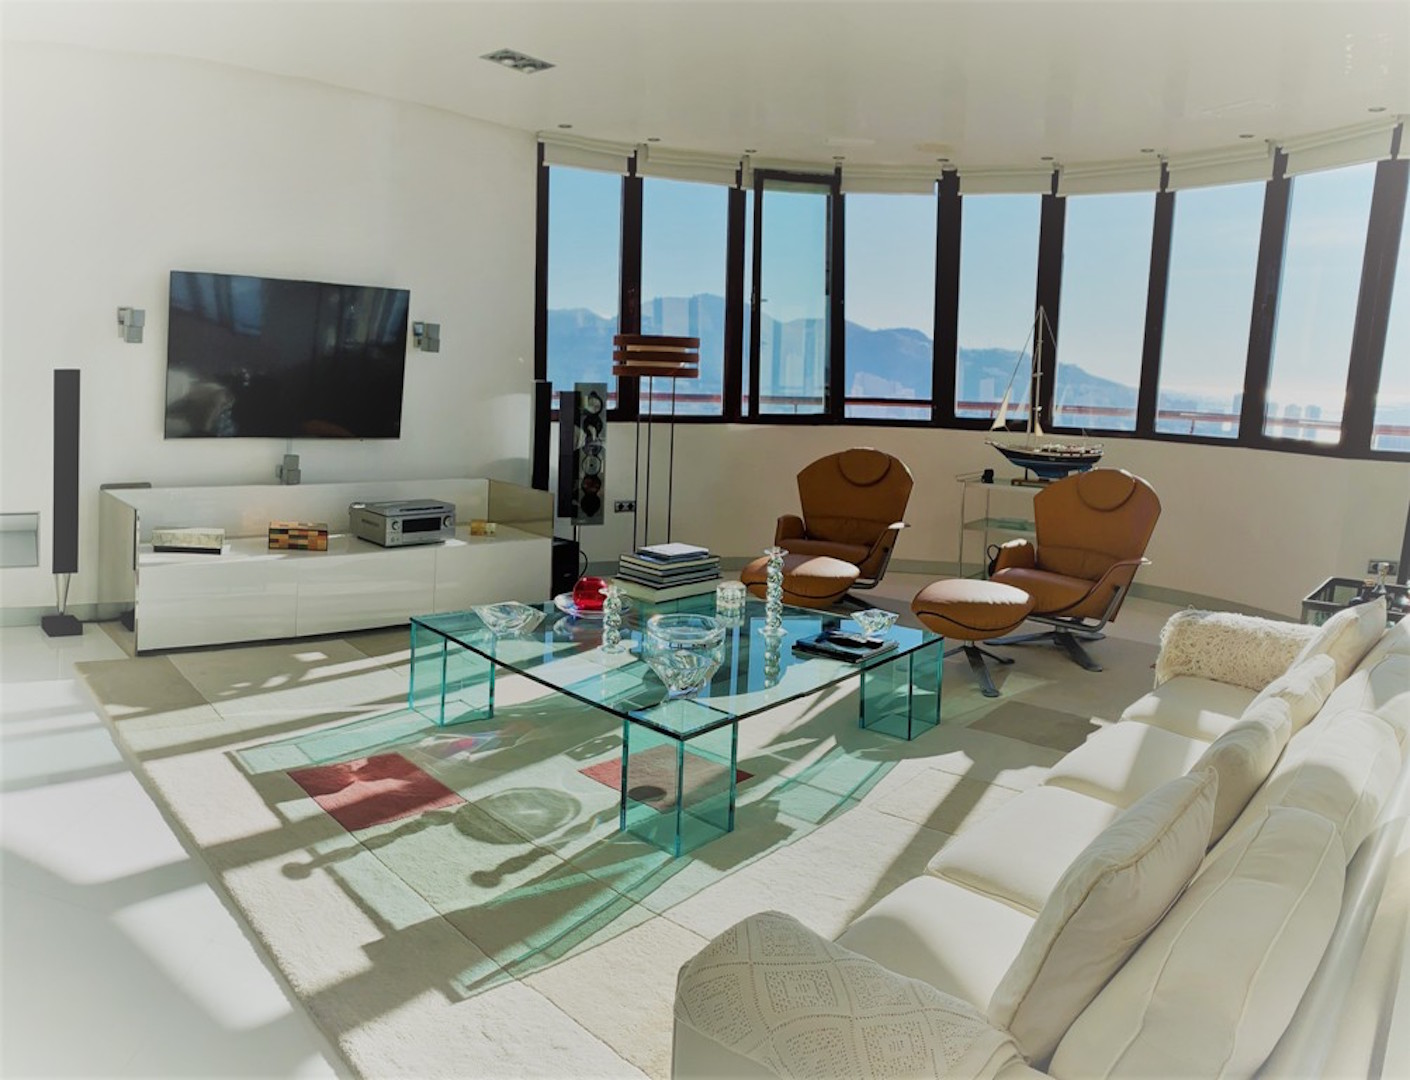 APARTMENT FOR SALE WITH VIEWS OF THE SKYLINE OF BENIDORM